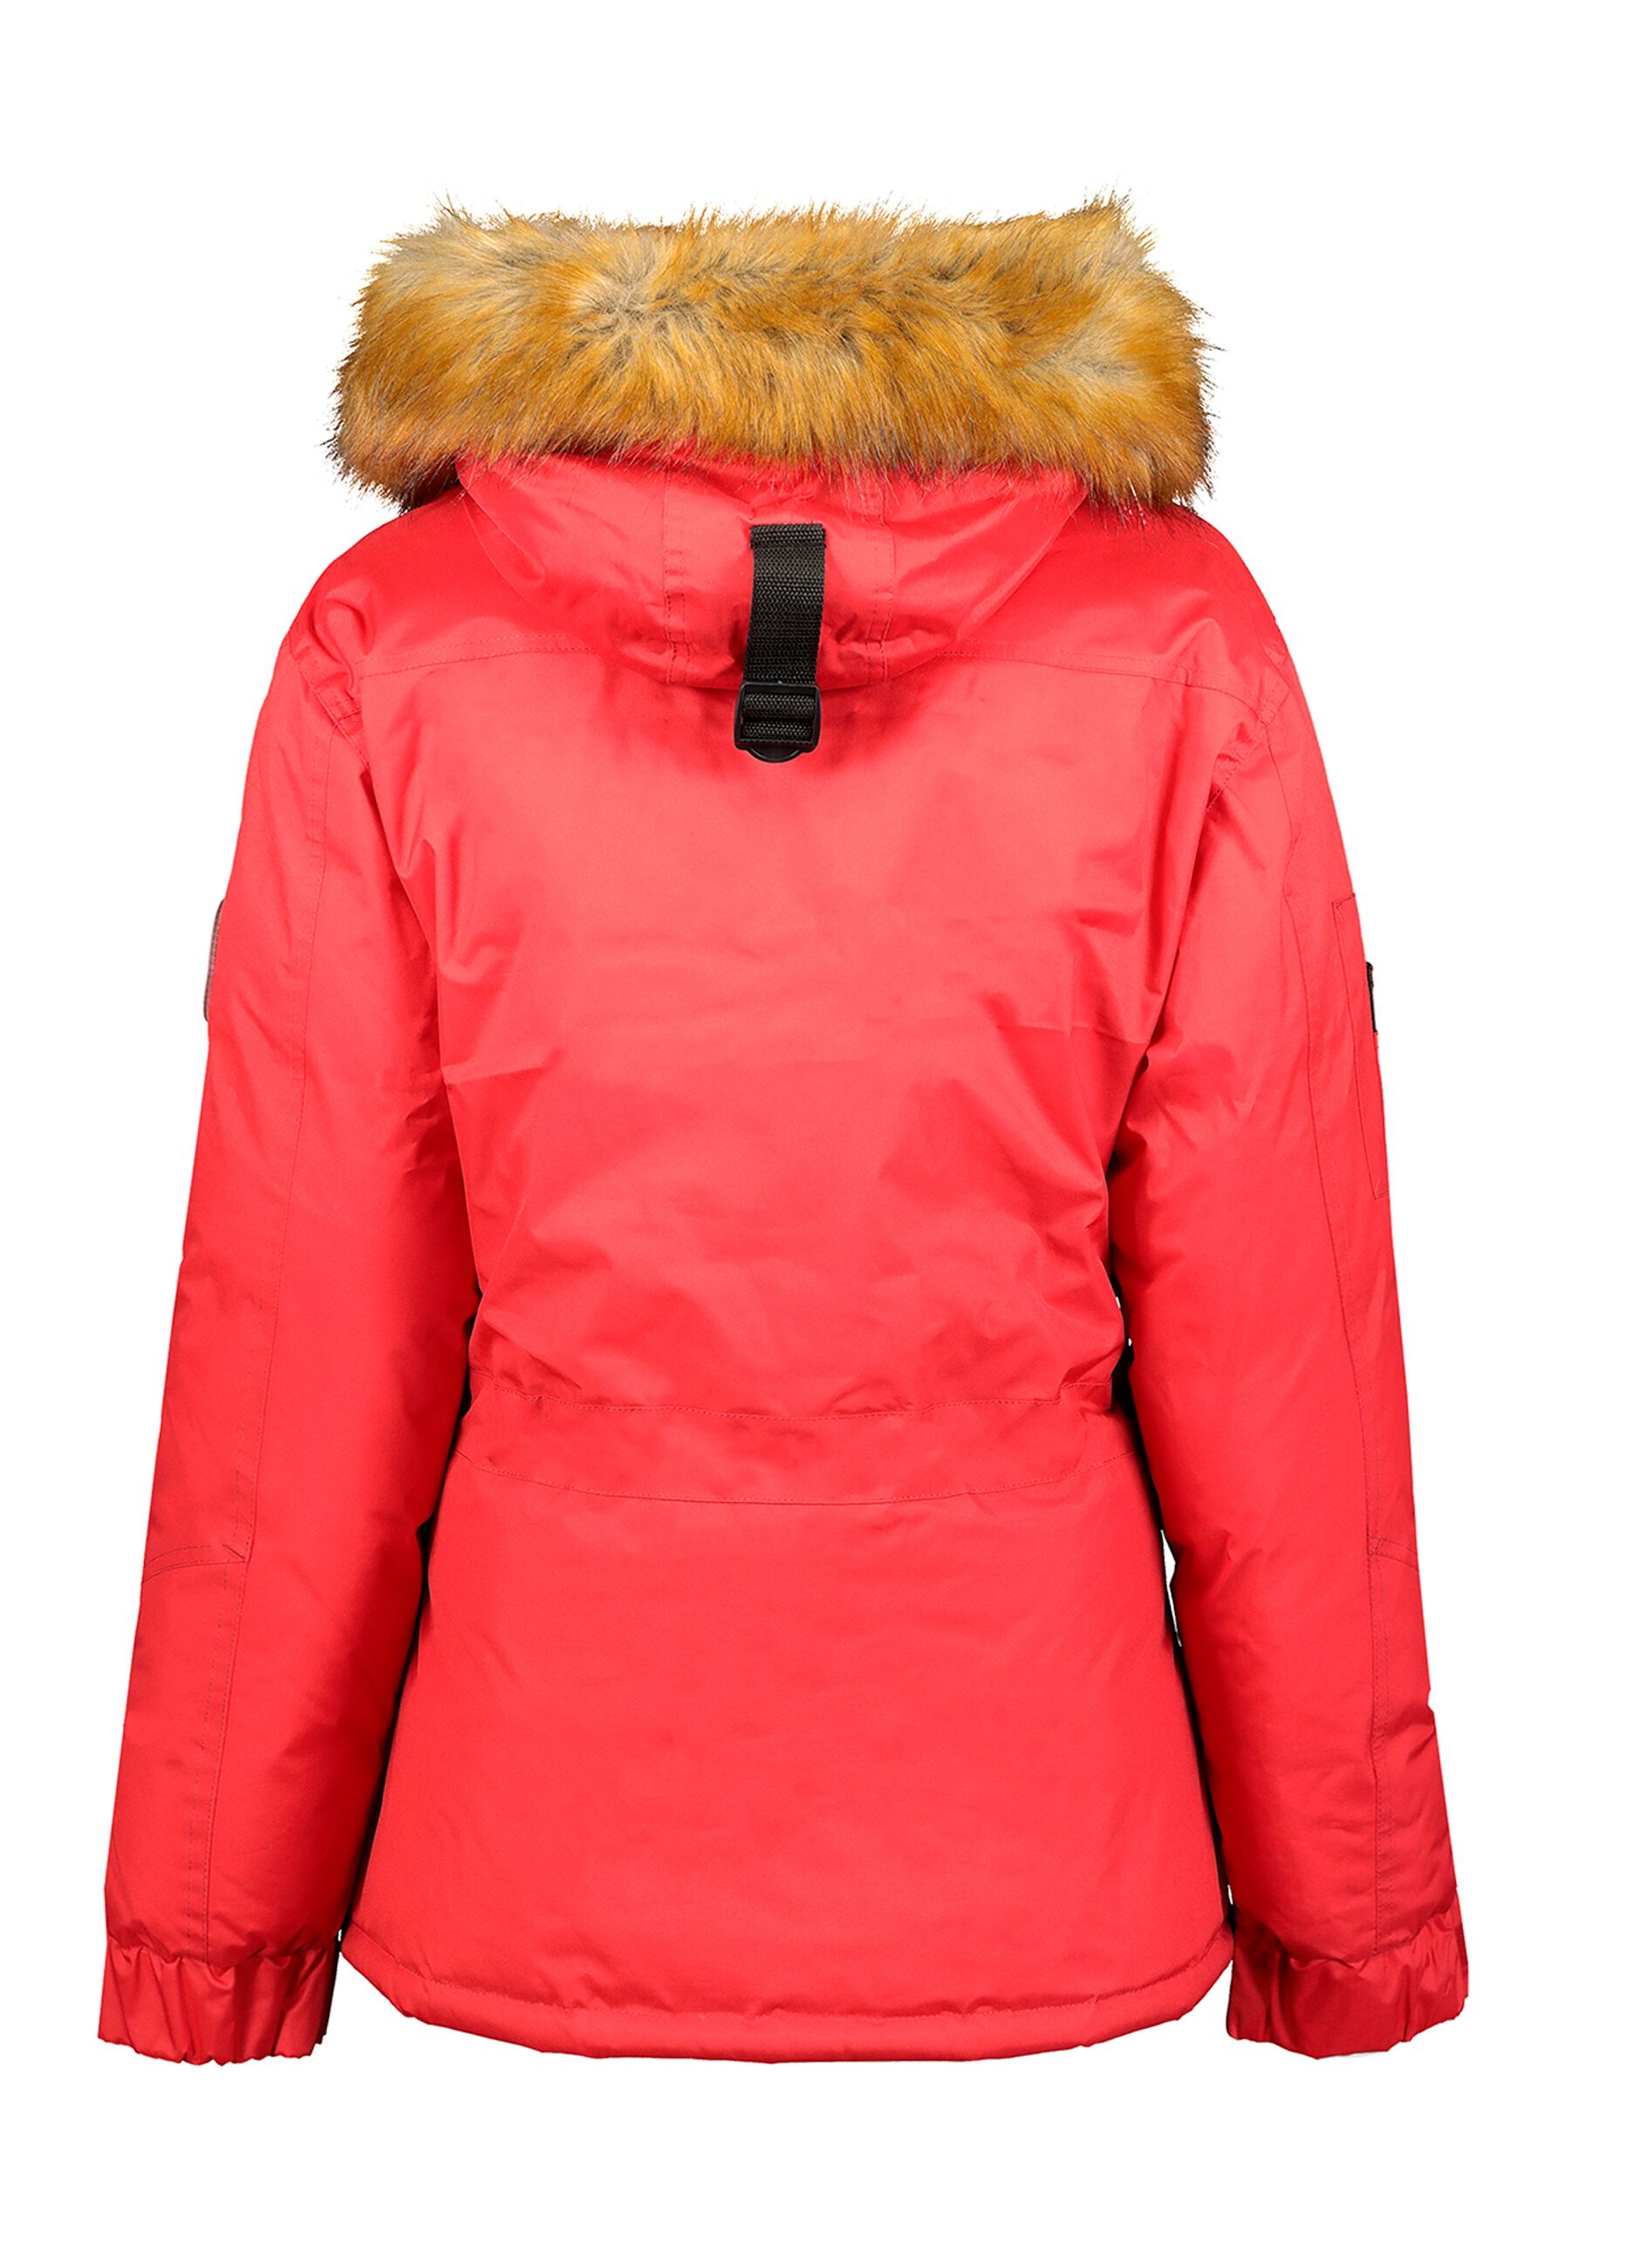 Geographical Norway- Parka de mujer ANSON Rojo Talla M